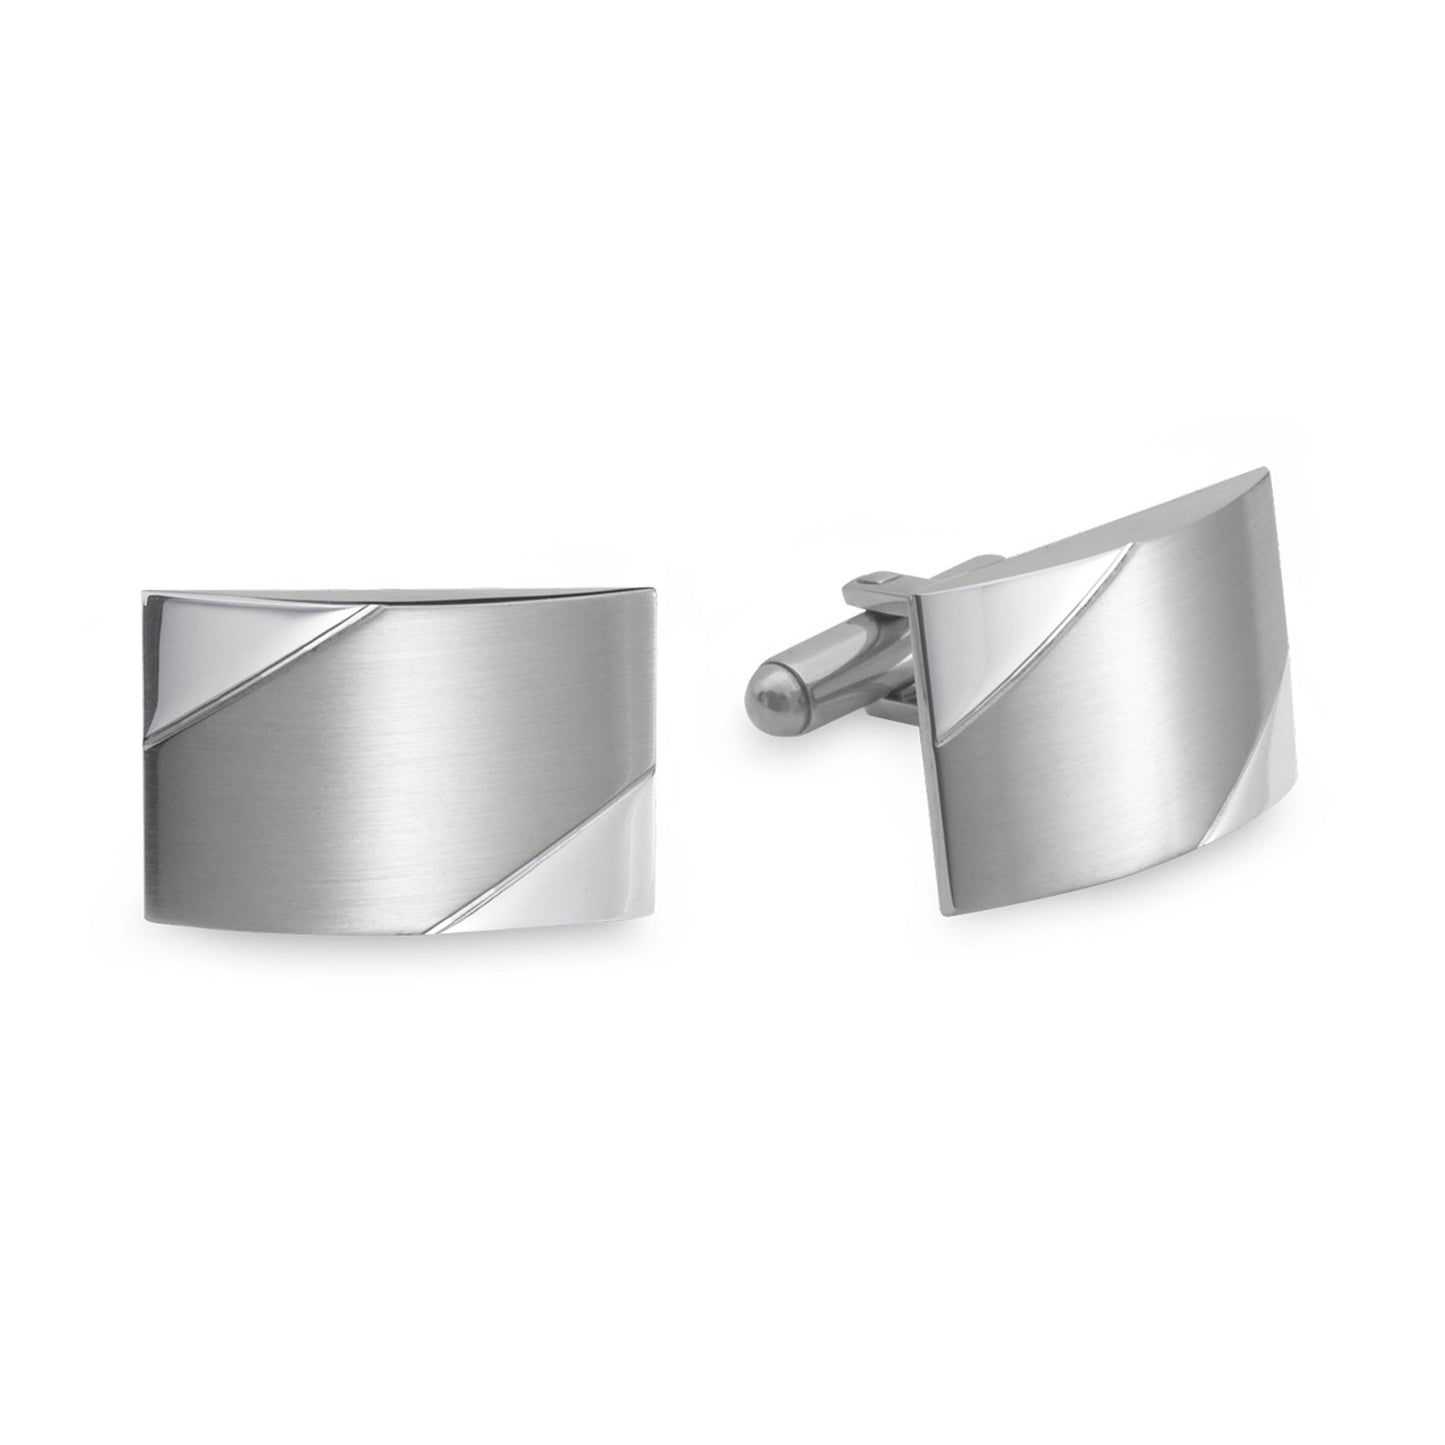 A stainless steel rectangle polished & matte cufflinks displayed on a neutral white background.